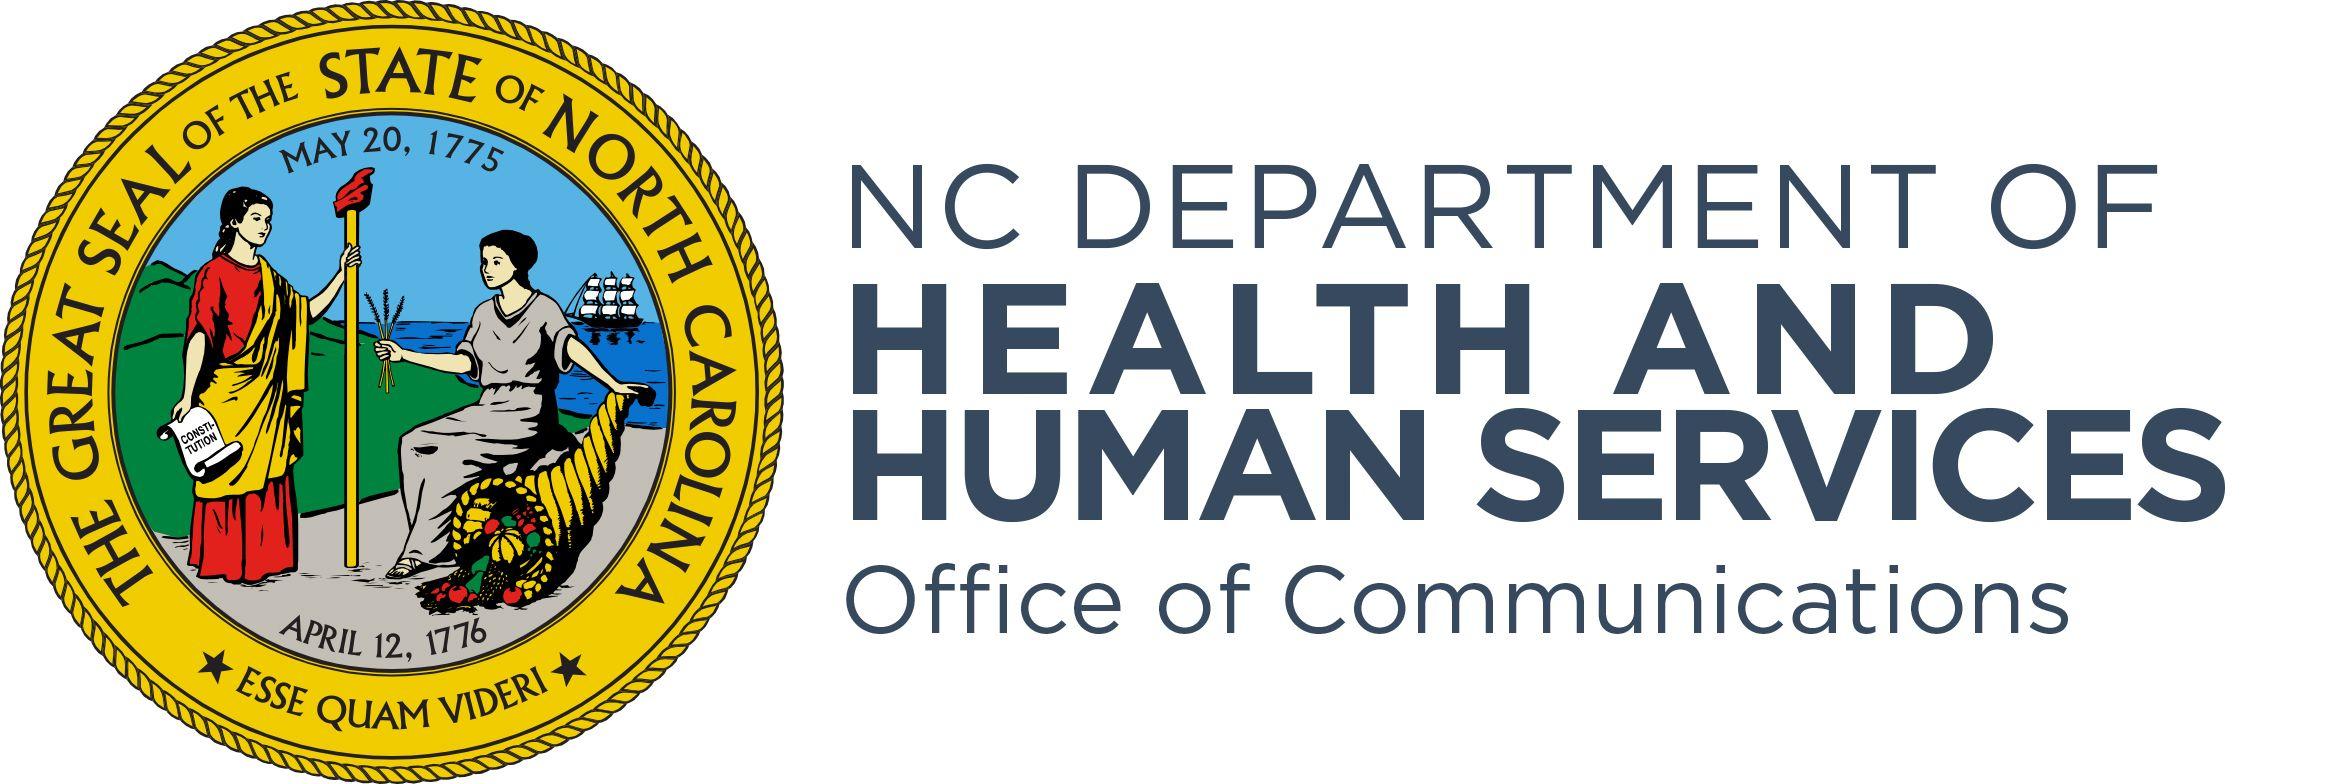 DHHS Logo - NCDHHS: New Logos, Brand Guidance Now Available for DHHS